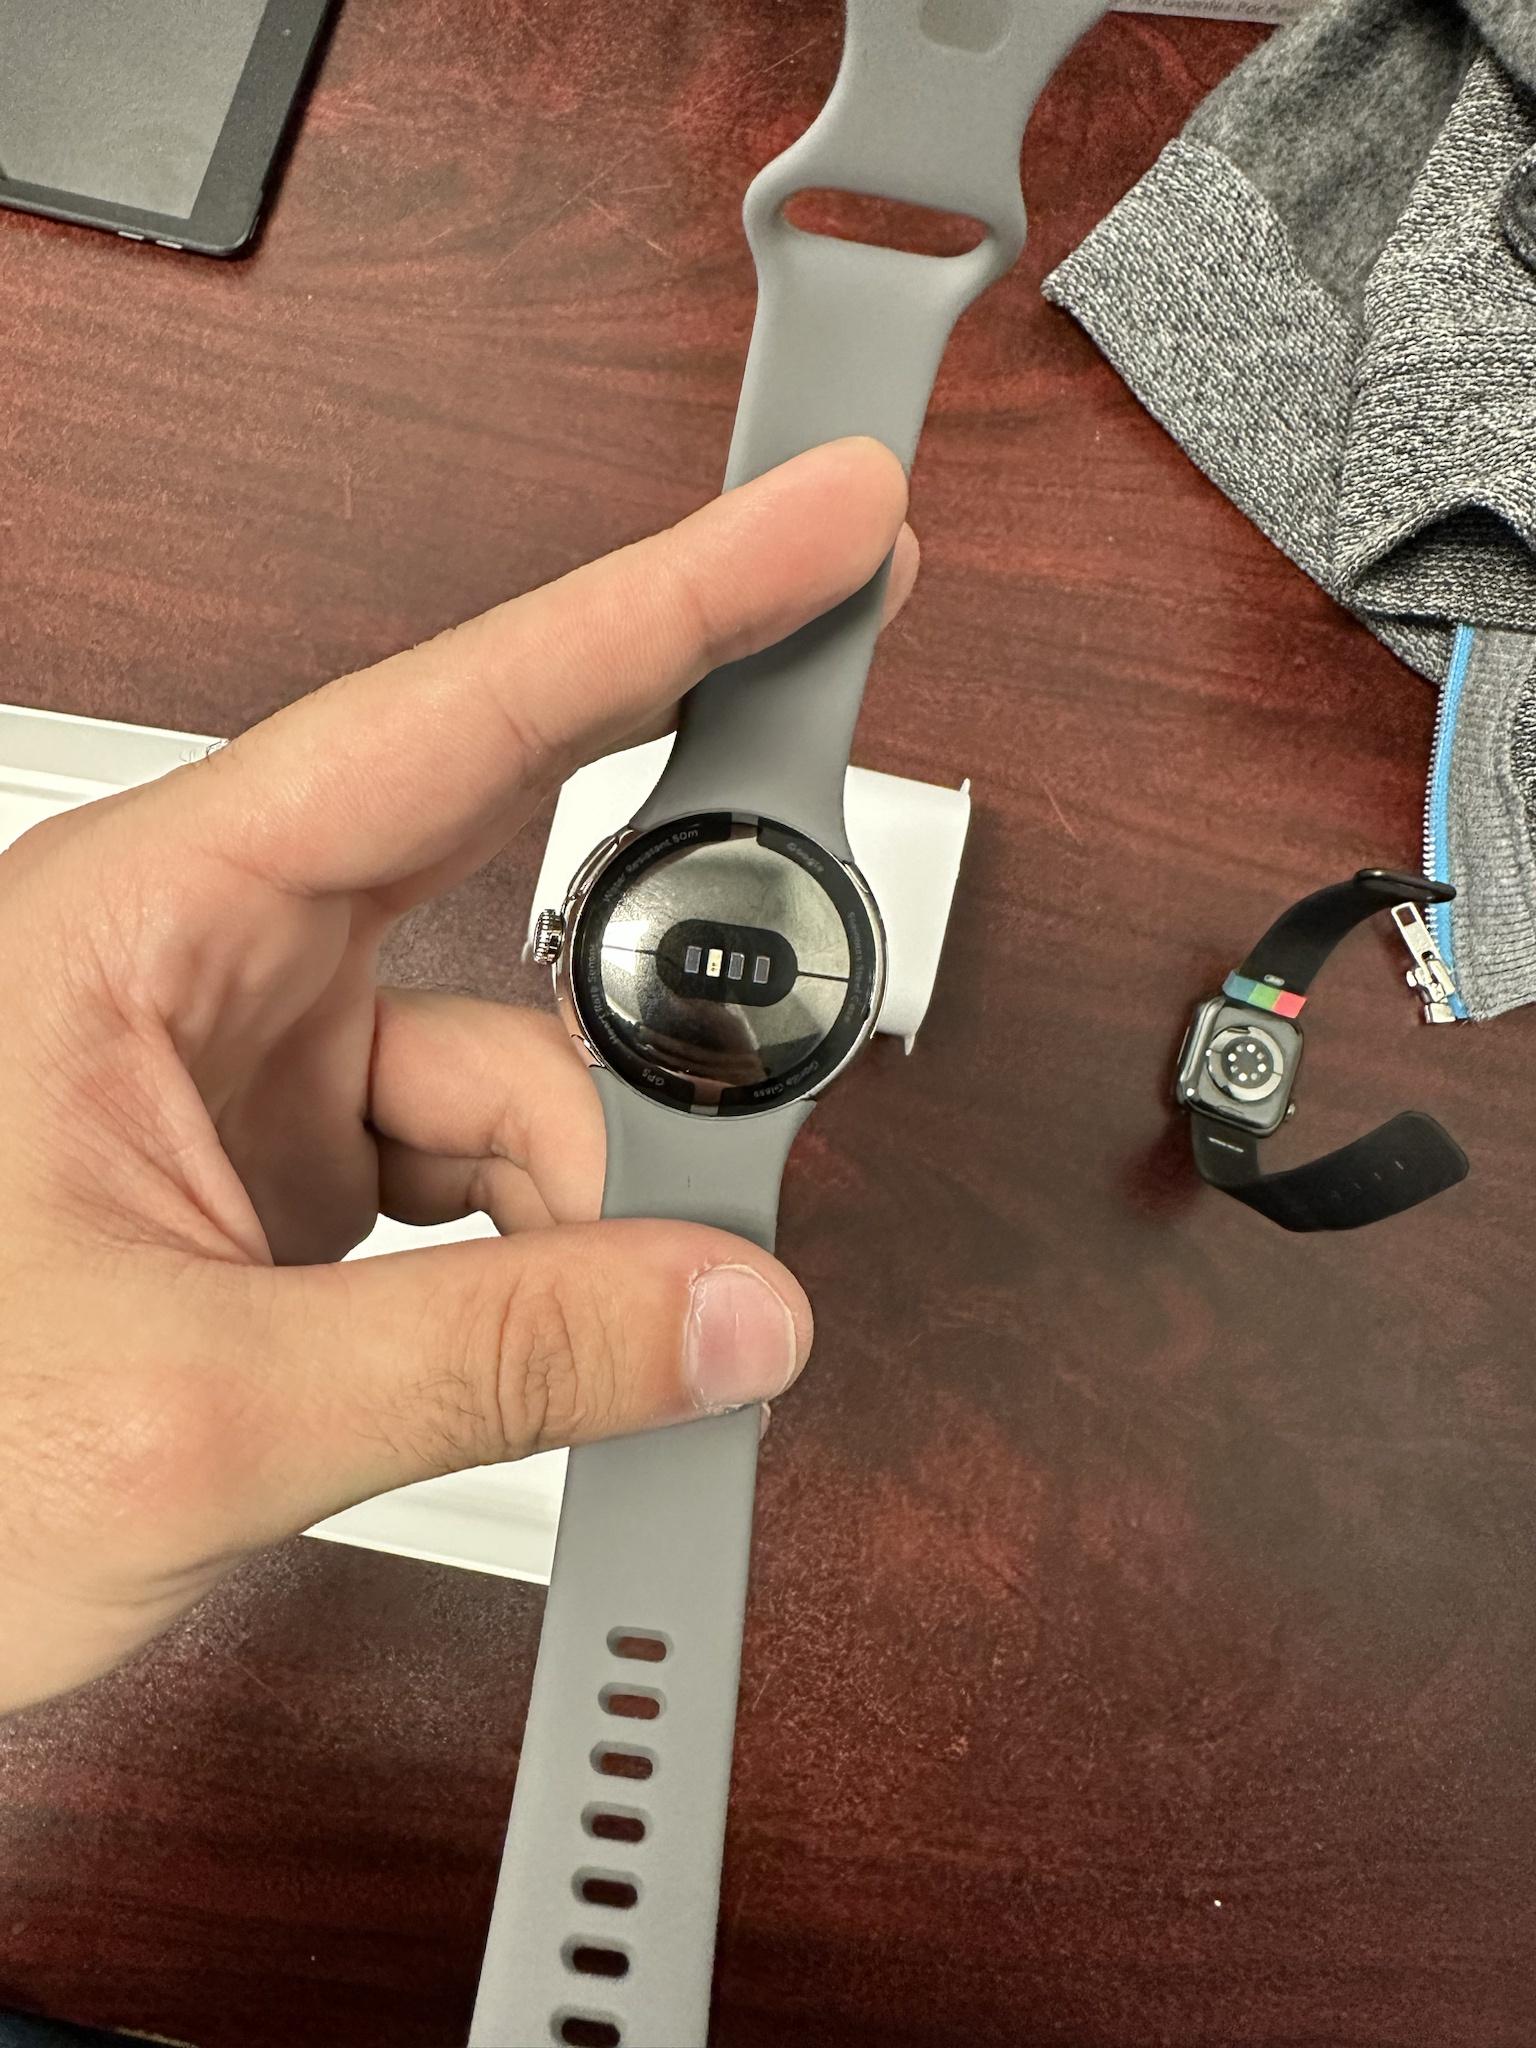 Someone Unboxed The Pixel Watch Early, And We Have Bad News